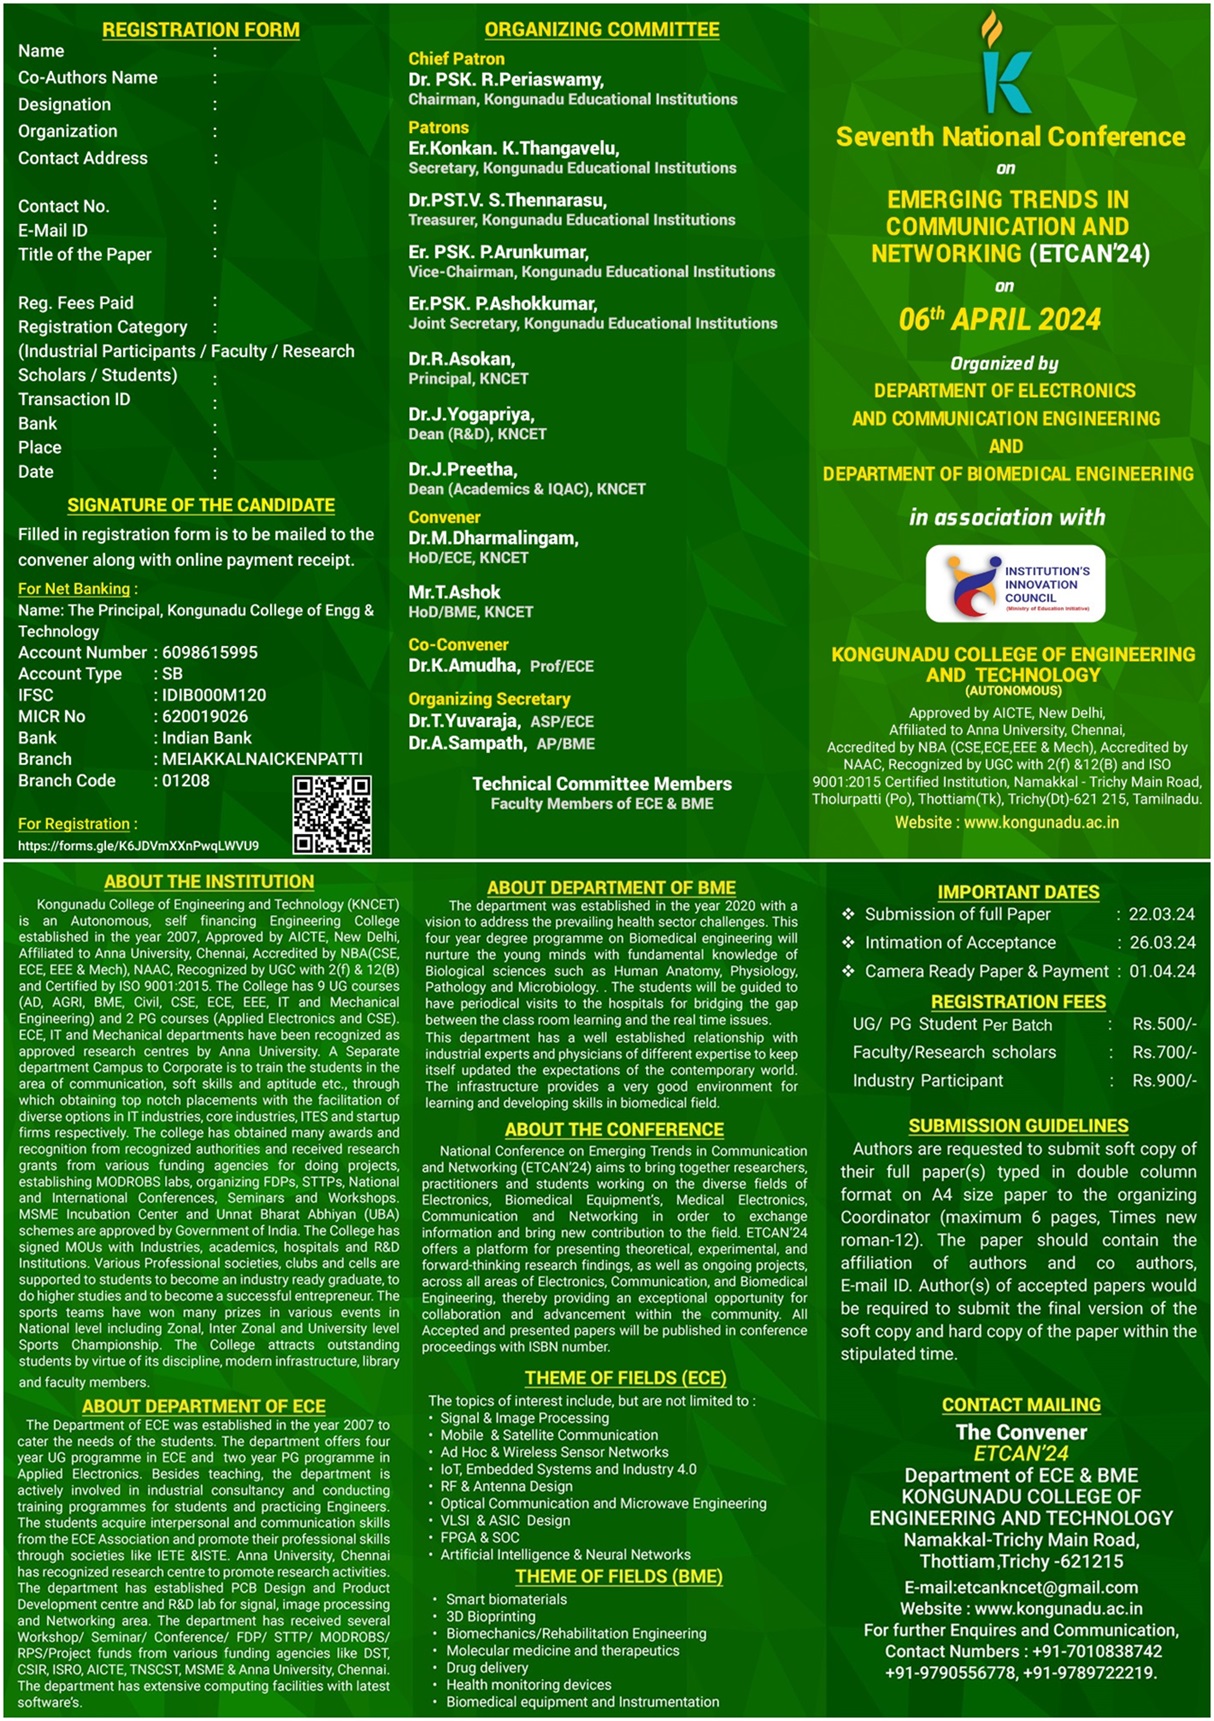 Seventh National Conference on "Emerging Trends in Communication and Networking (ETCAN’24)